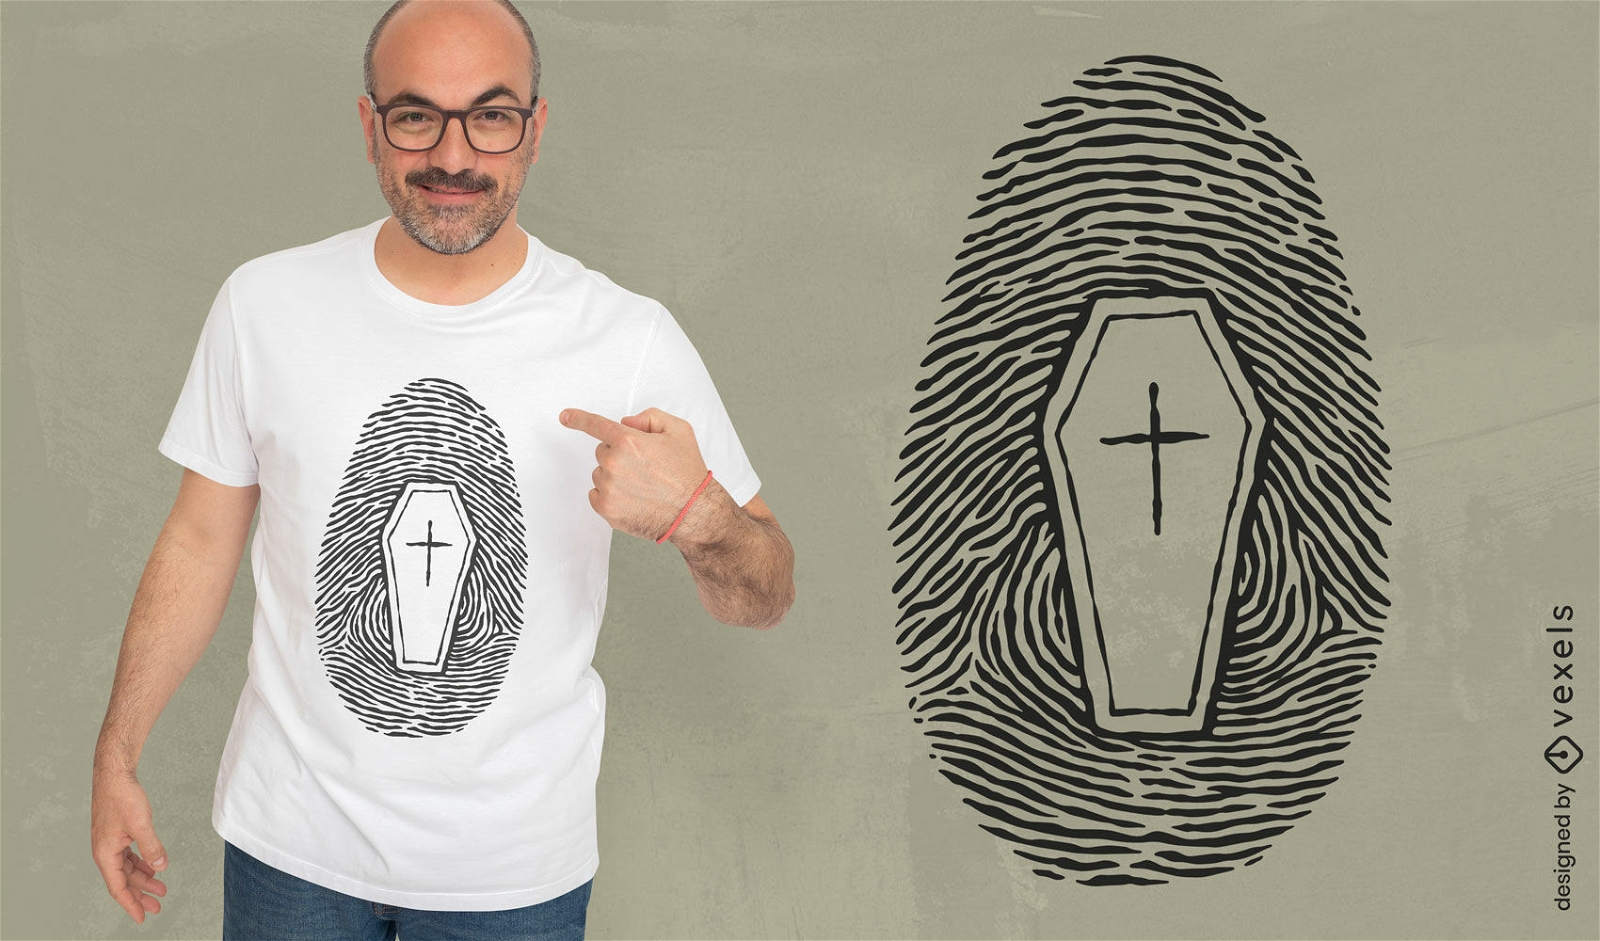 Finger print and coffin t-shirt design